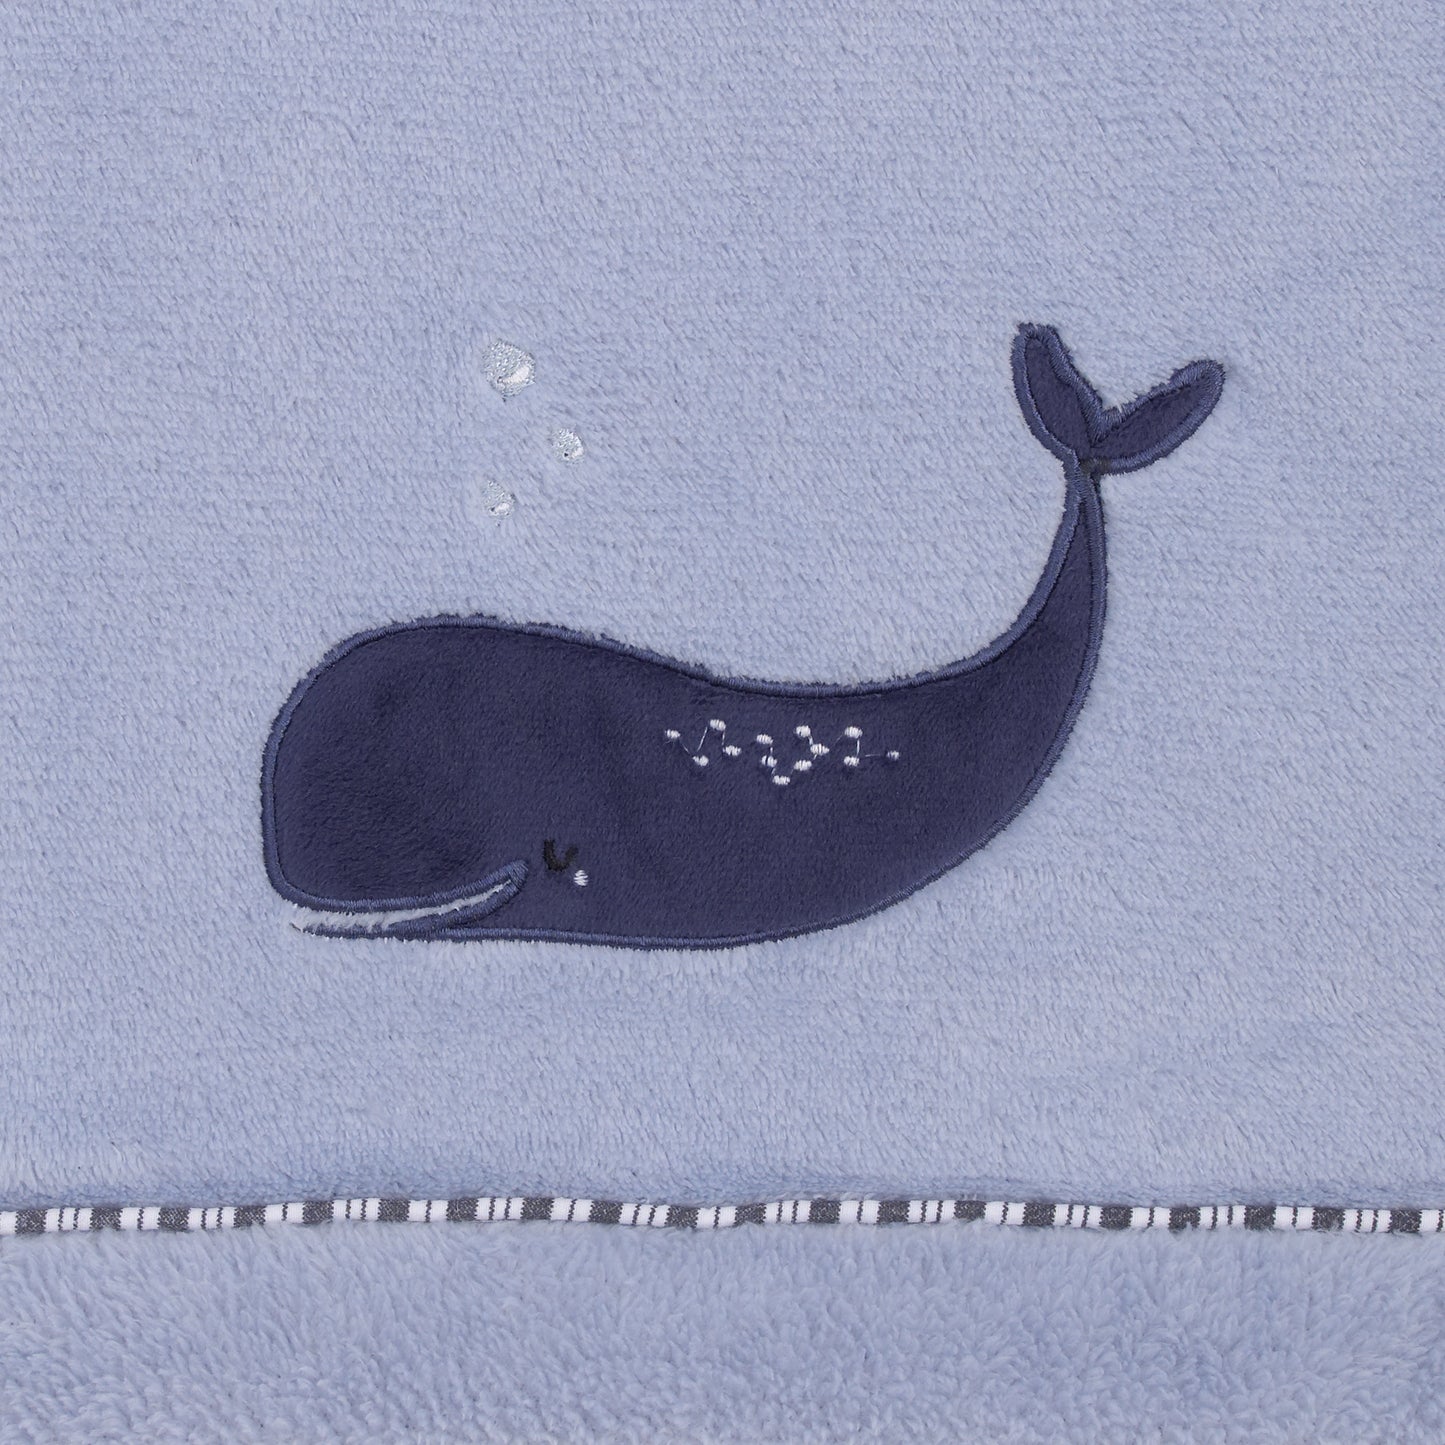 NoJo Seas The Day Blue Whale Super Soft Baby Blanket